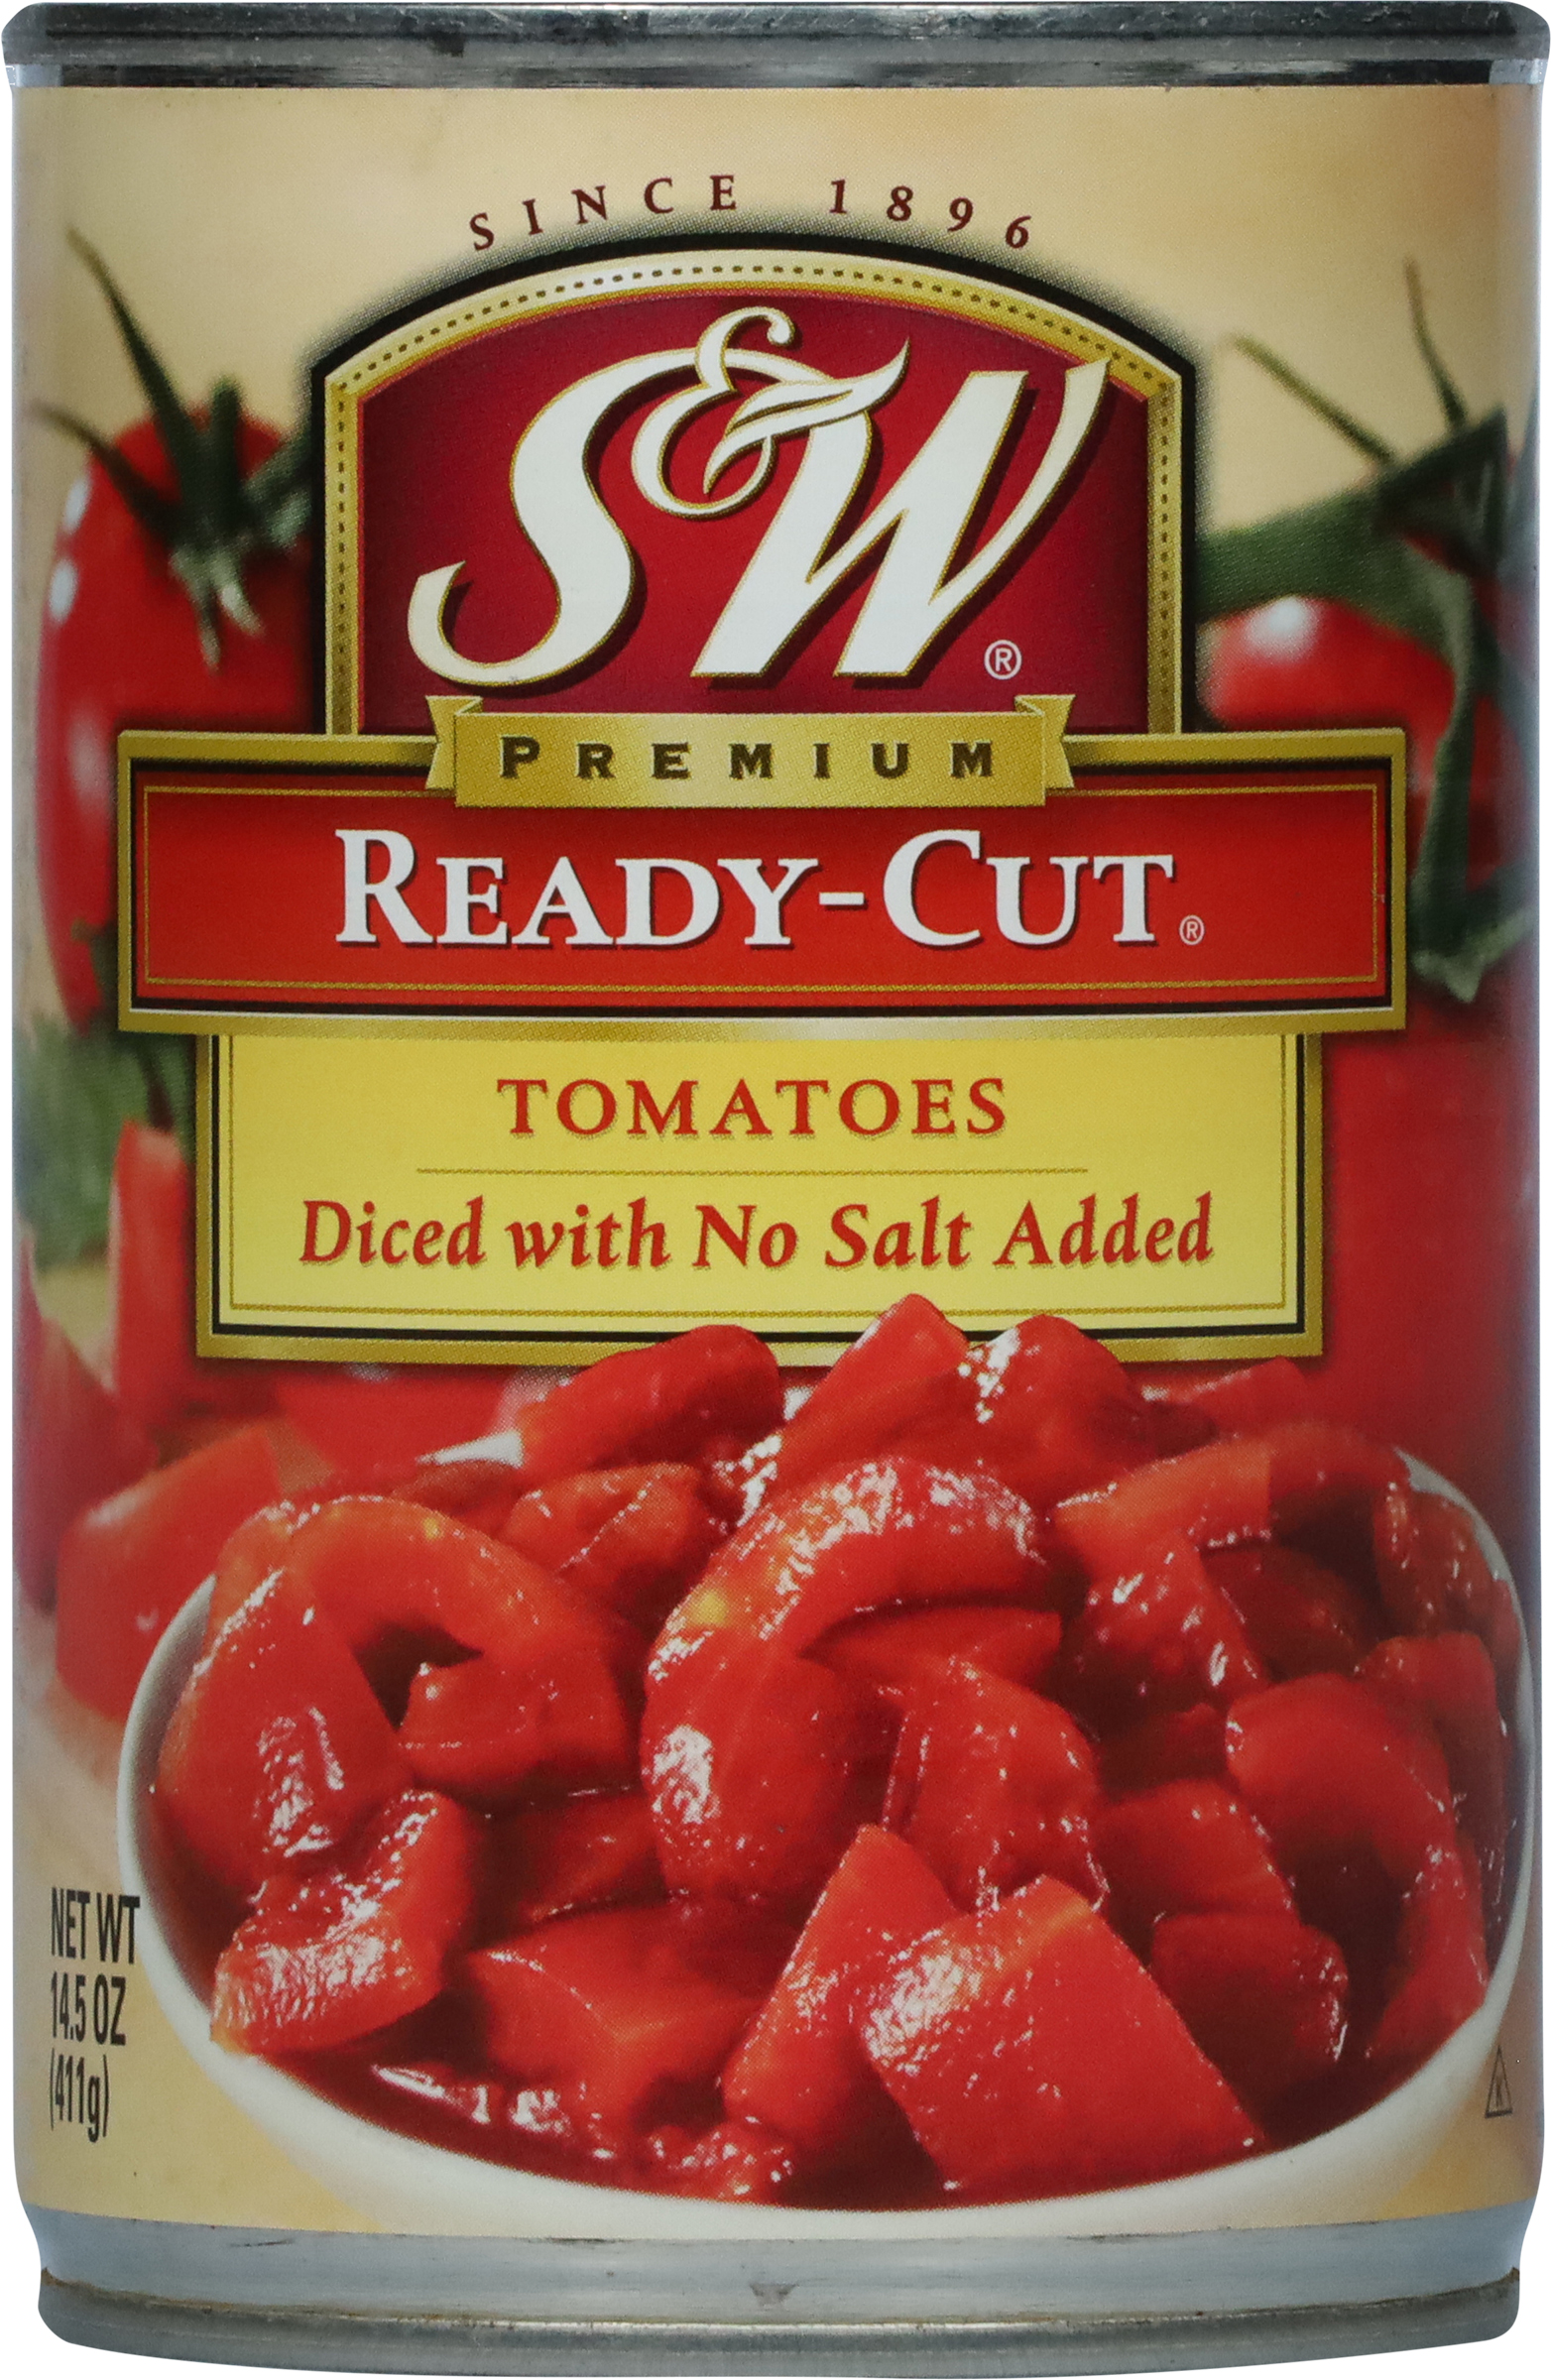 Tomatoes, Diced